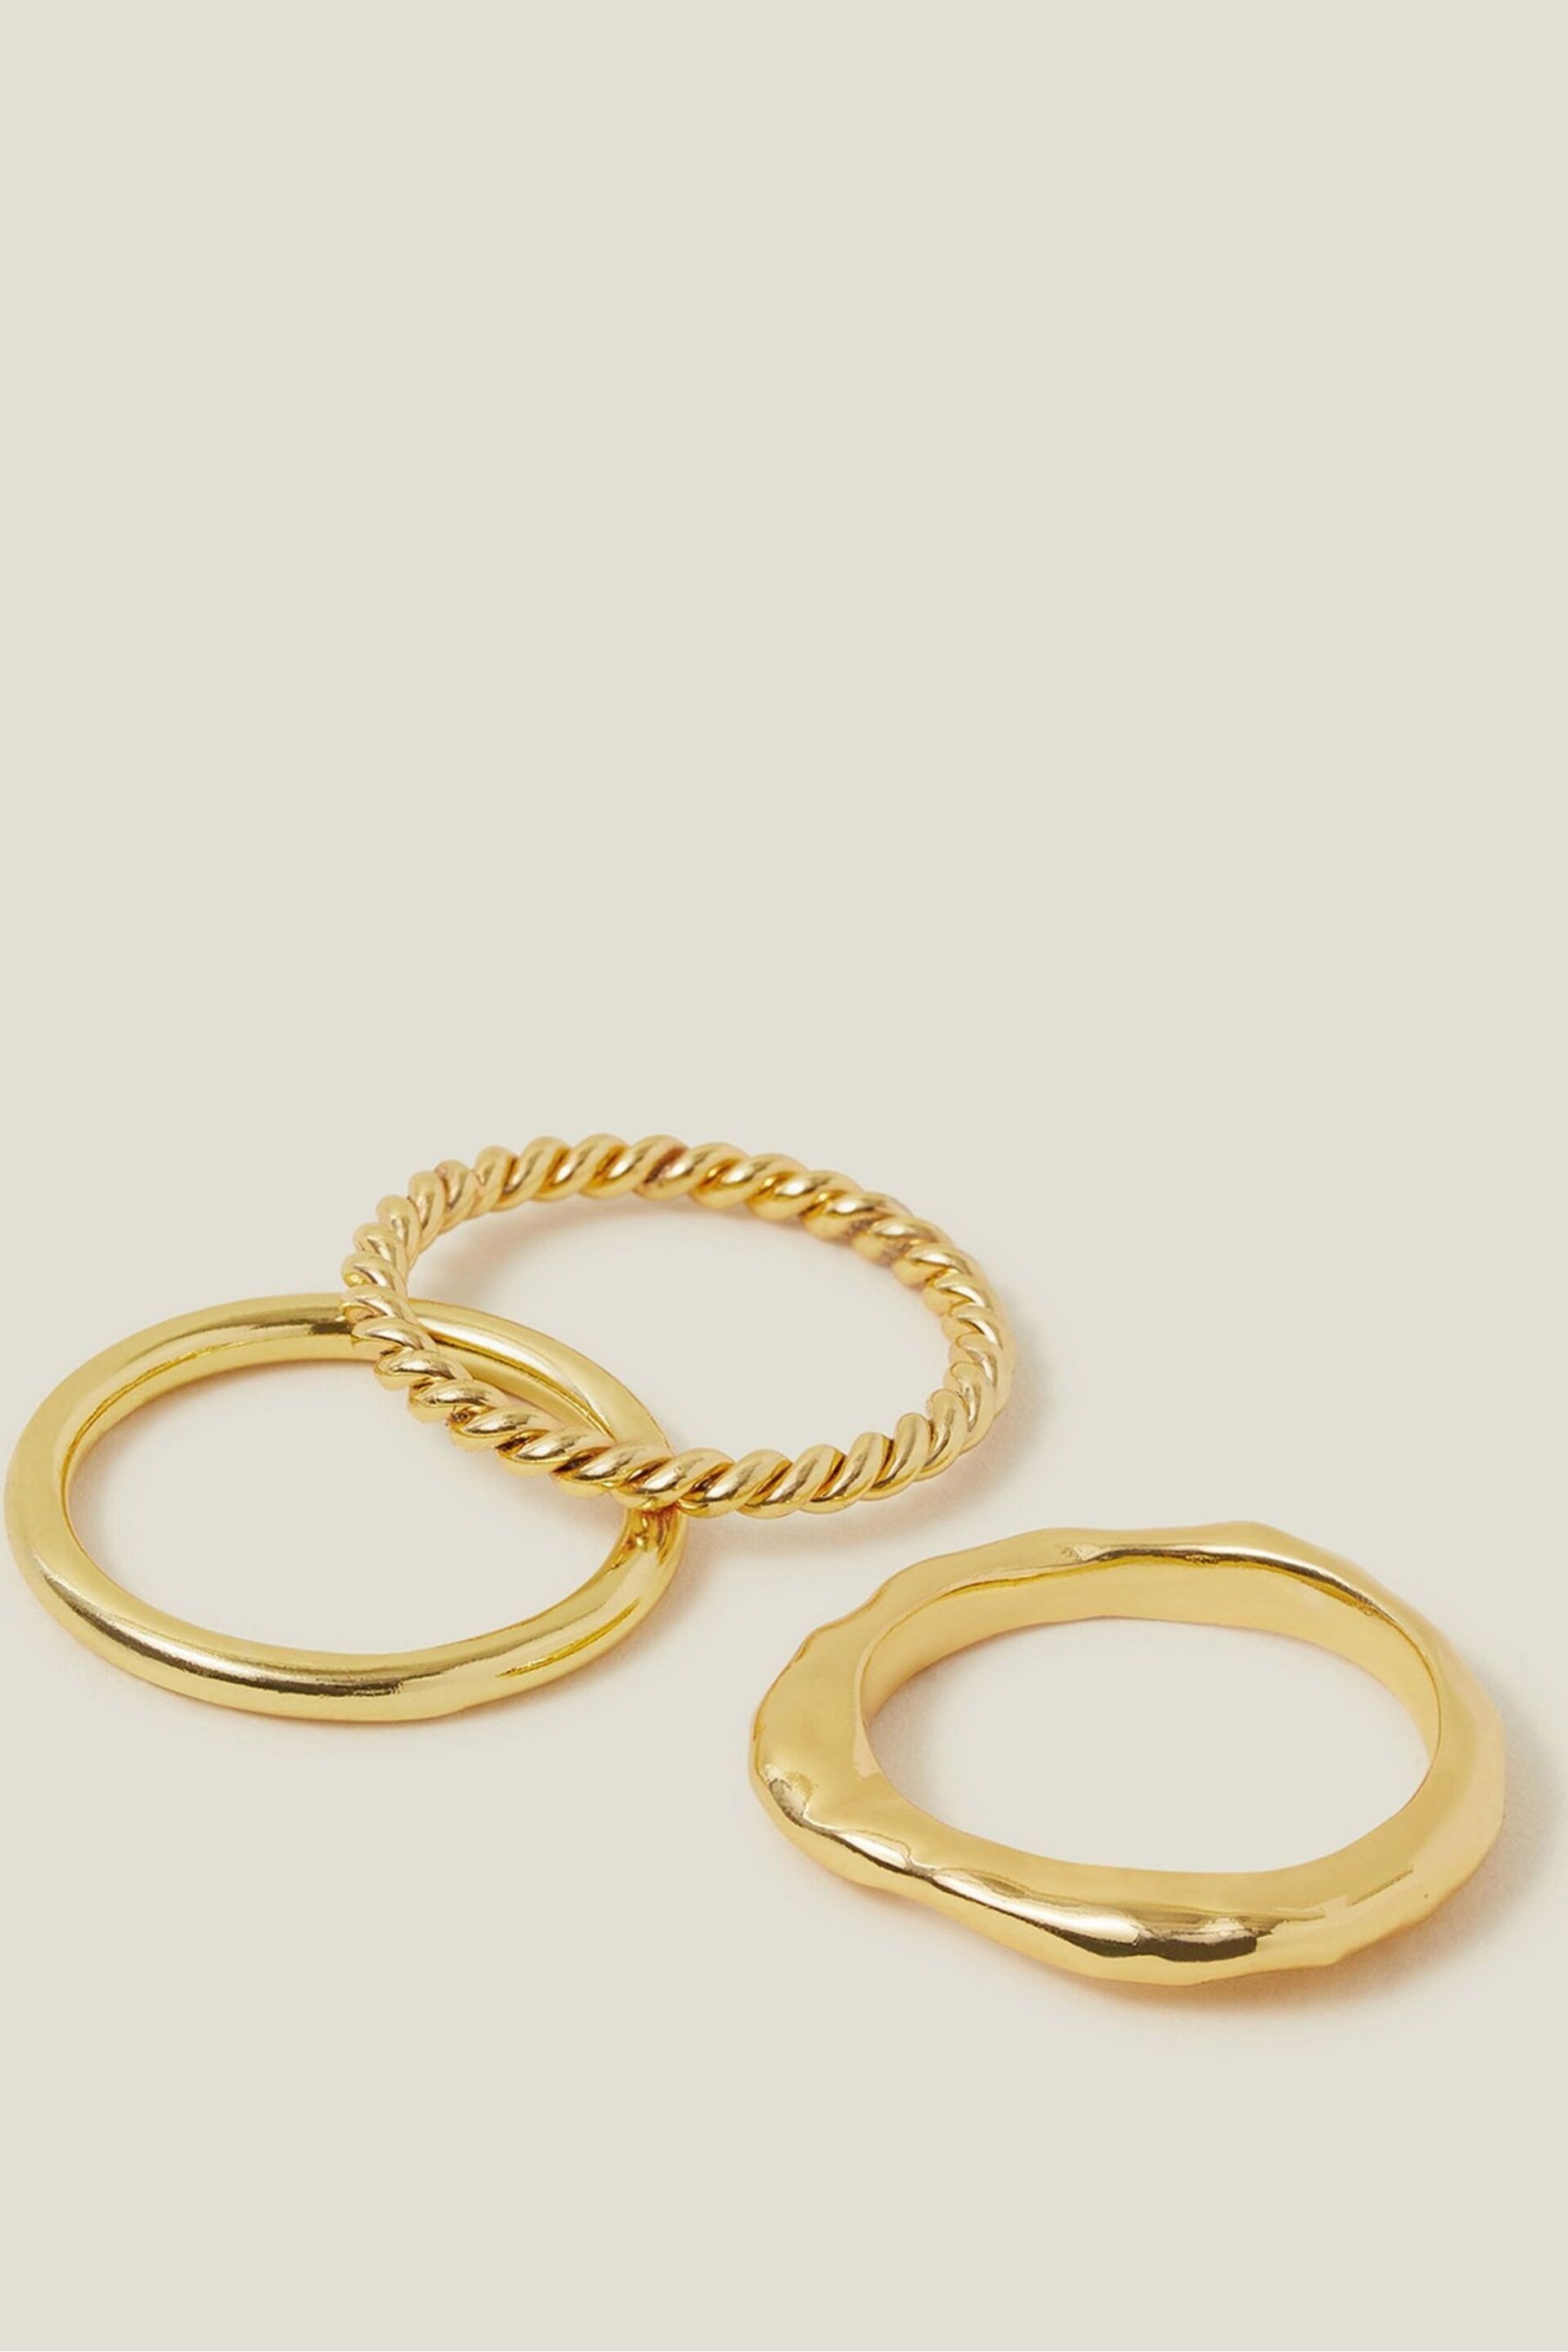 Accessorize 14ct Gold Plated Mixed Rings 3 Pack - Image 1 of 2